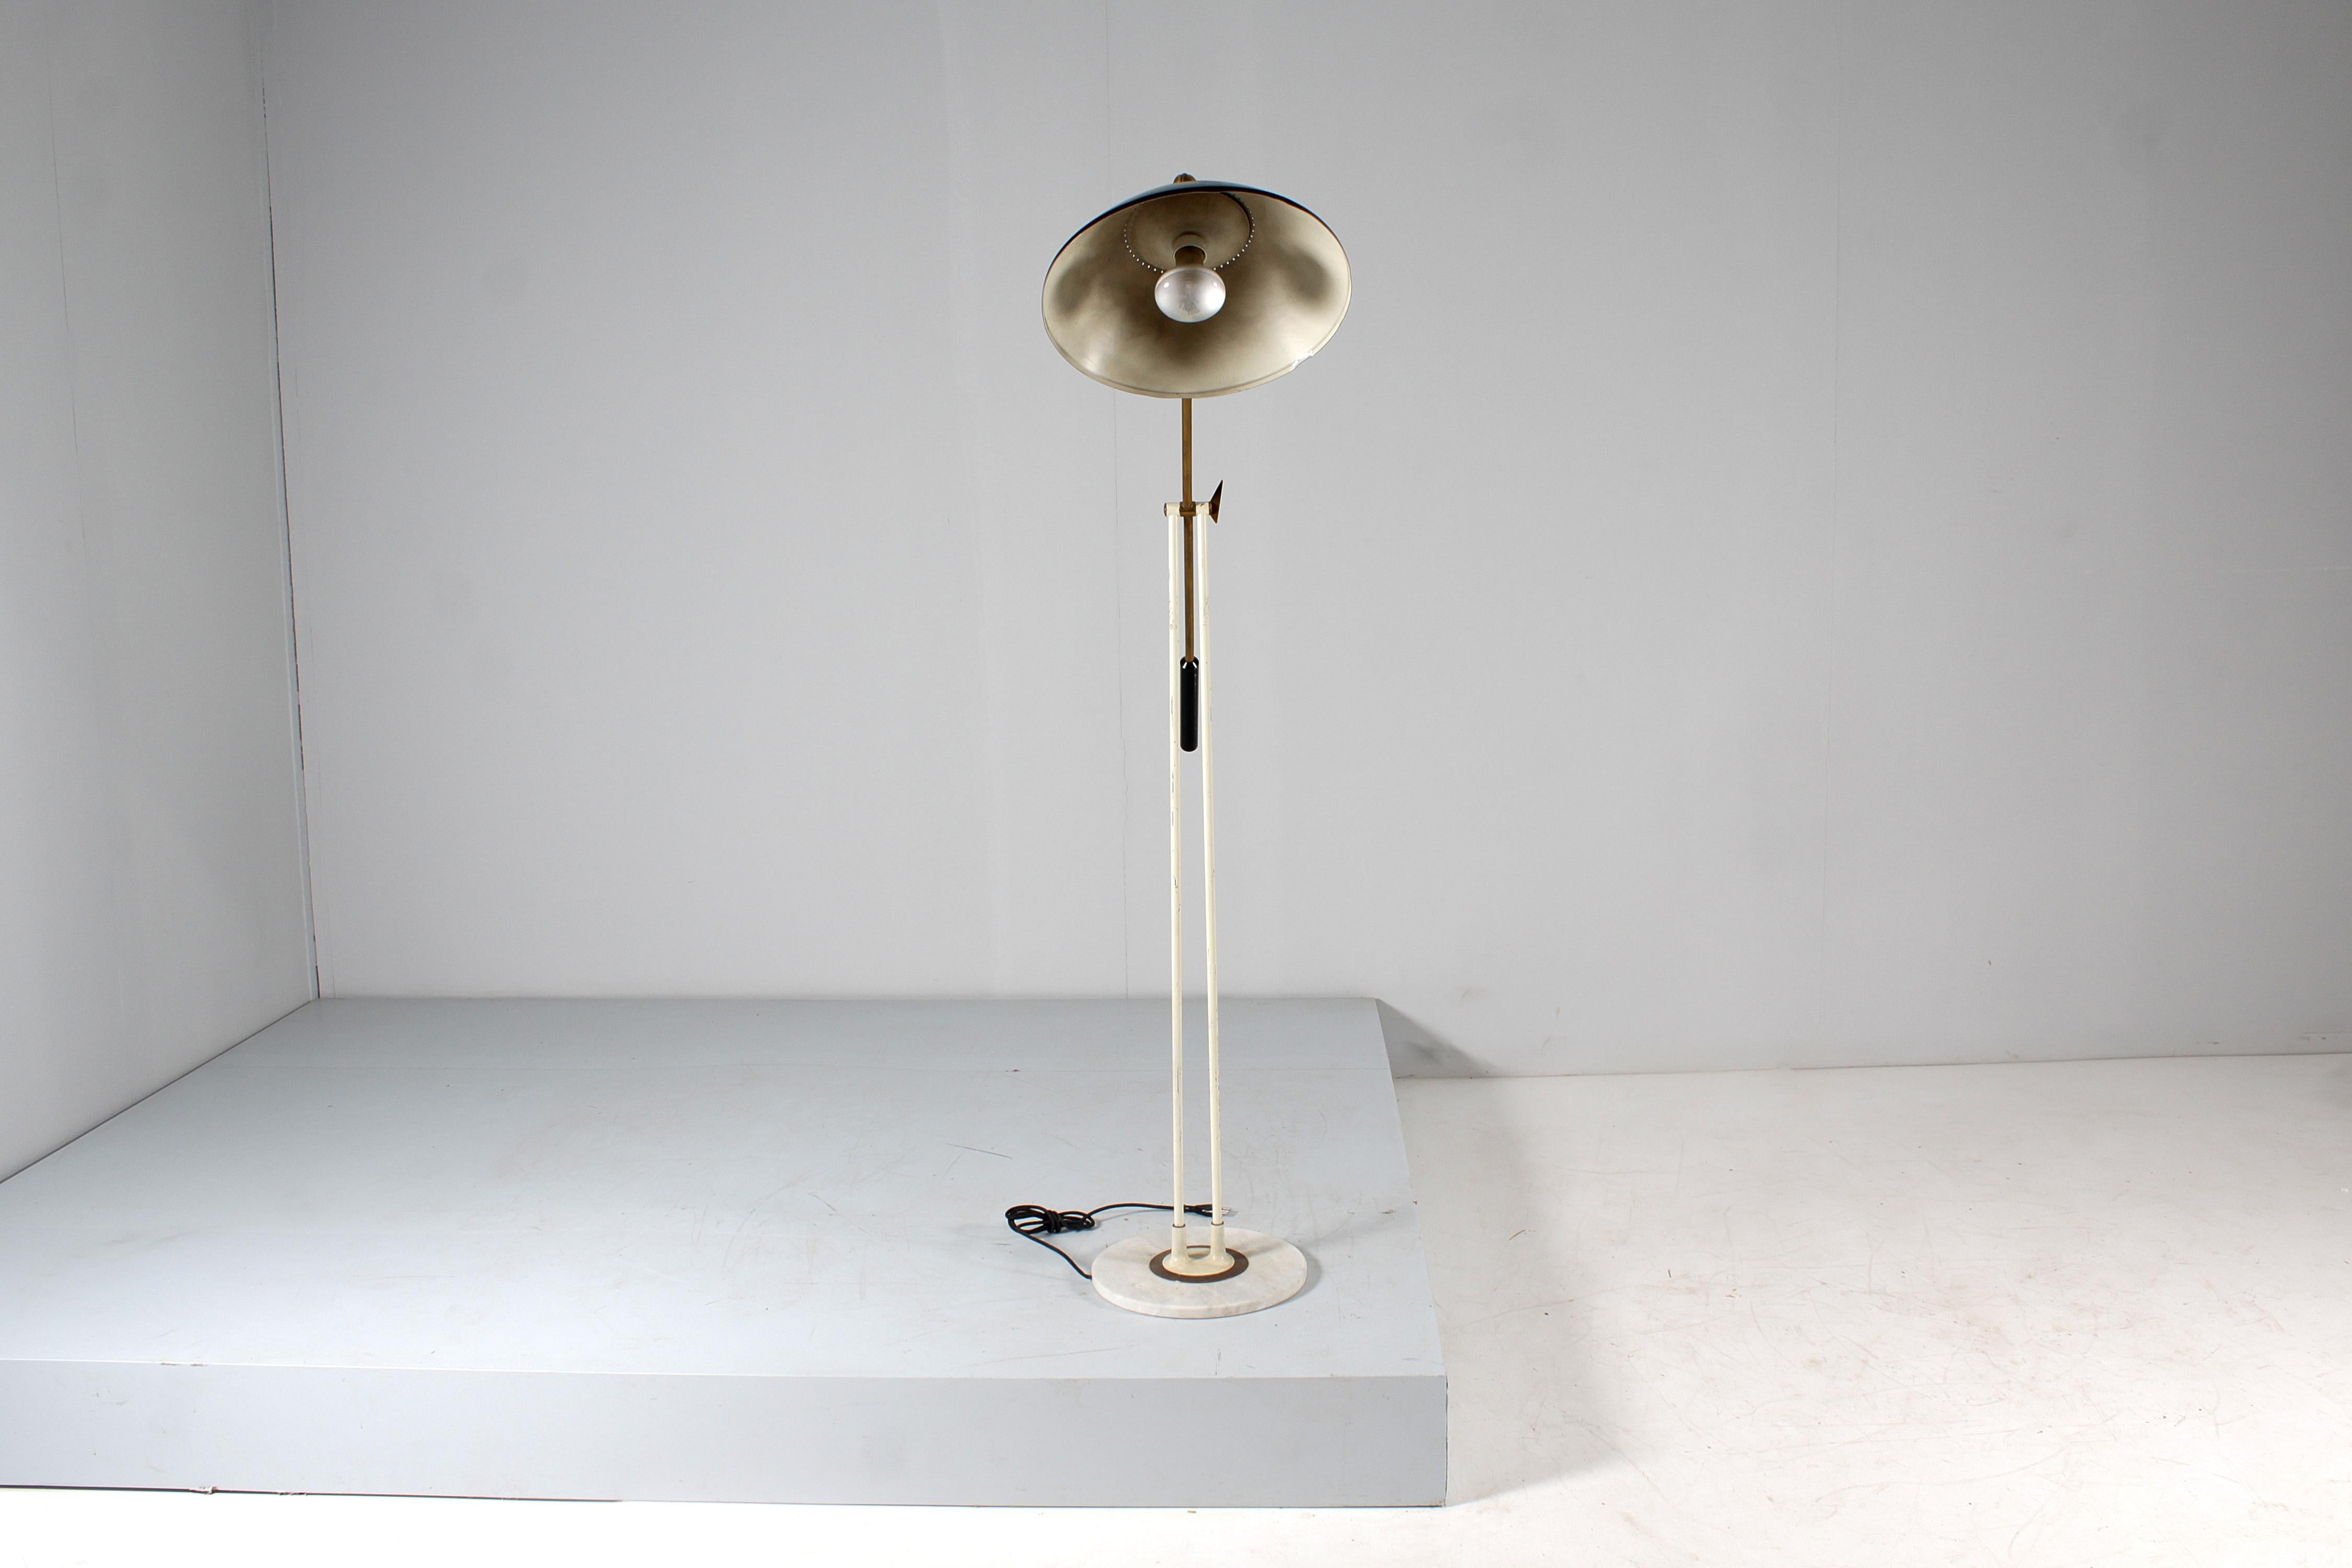 Stylish floor lamp with adjustable and directional rocker in golden brass, diffuser in black lacquered metal with perforated circumference, vertical support in white painted metal on a circular base in white marble with a banded circumference in